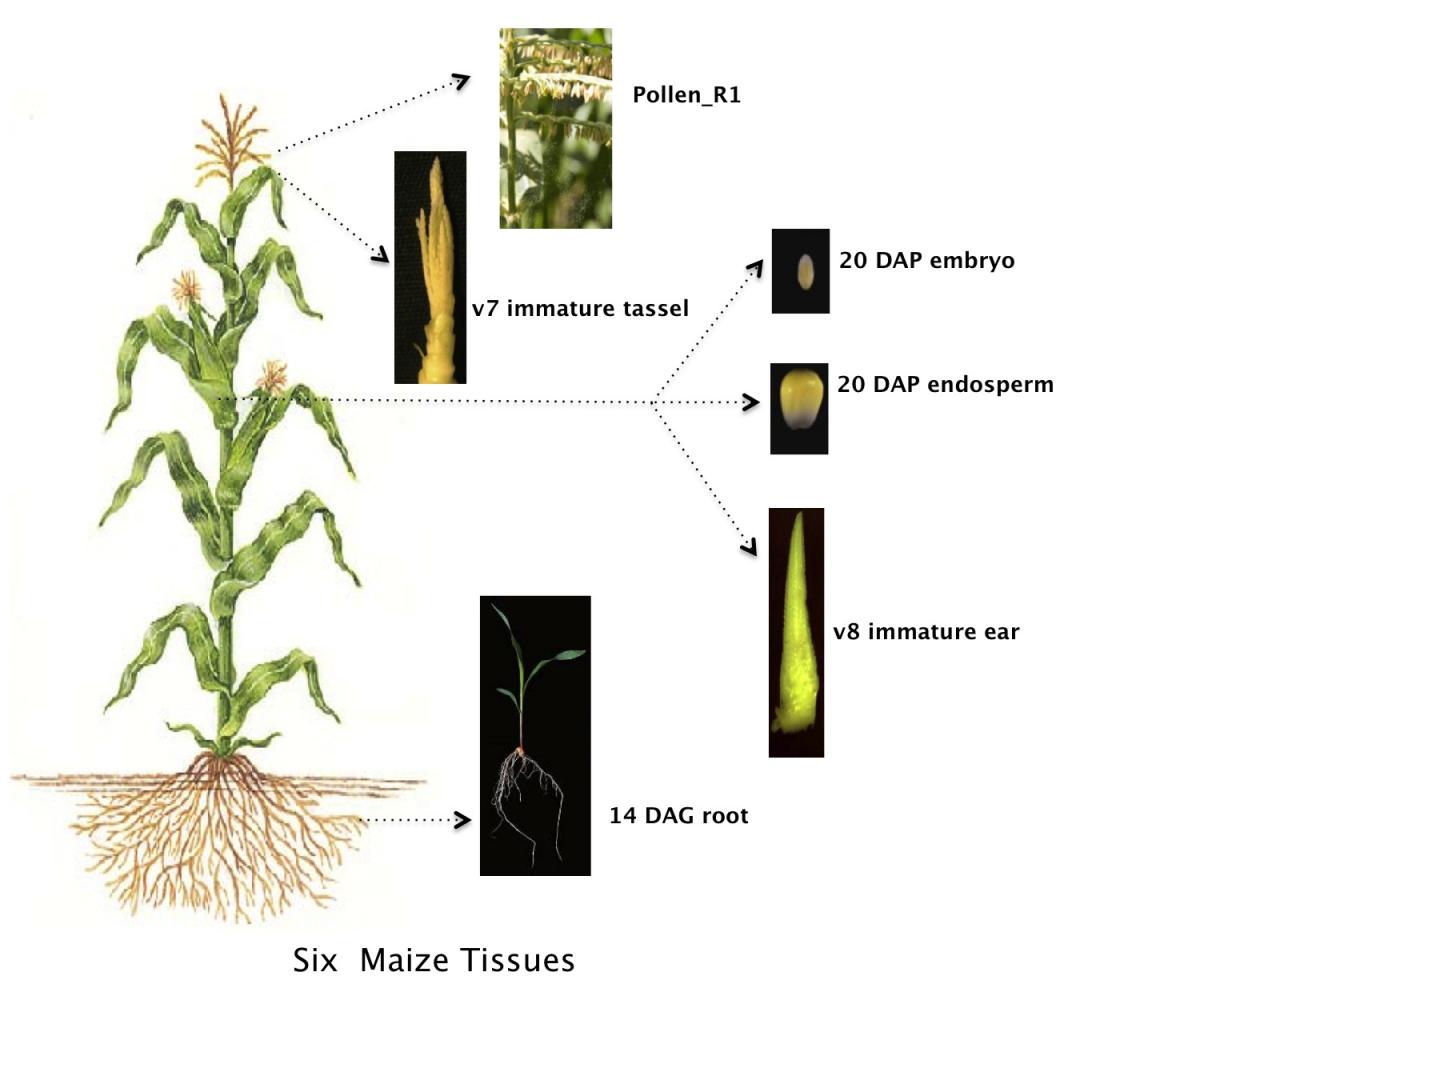 Remarkable Diversity in the Maize Plant